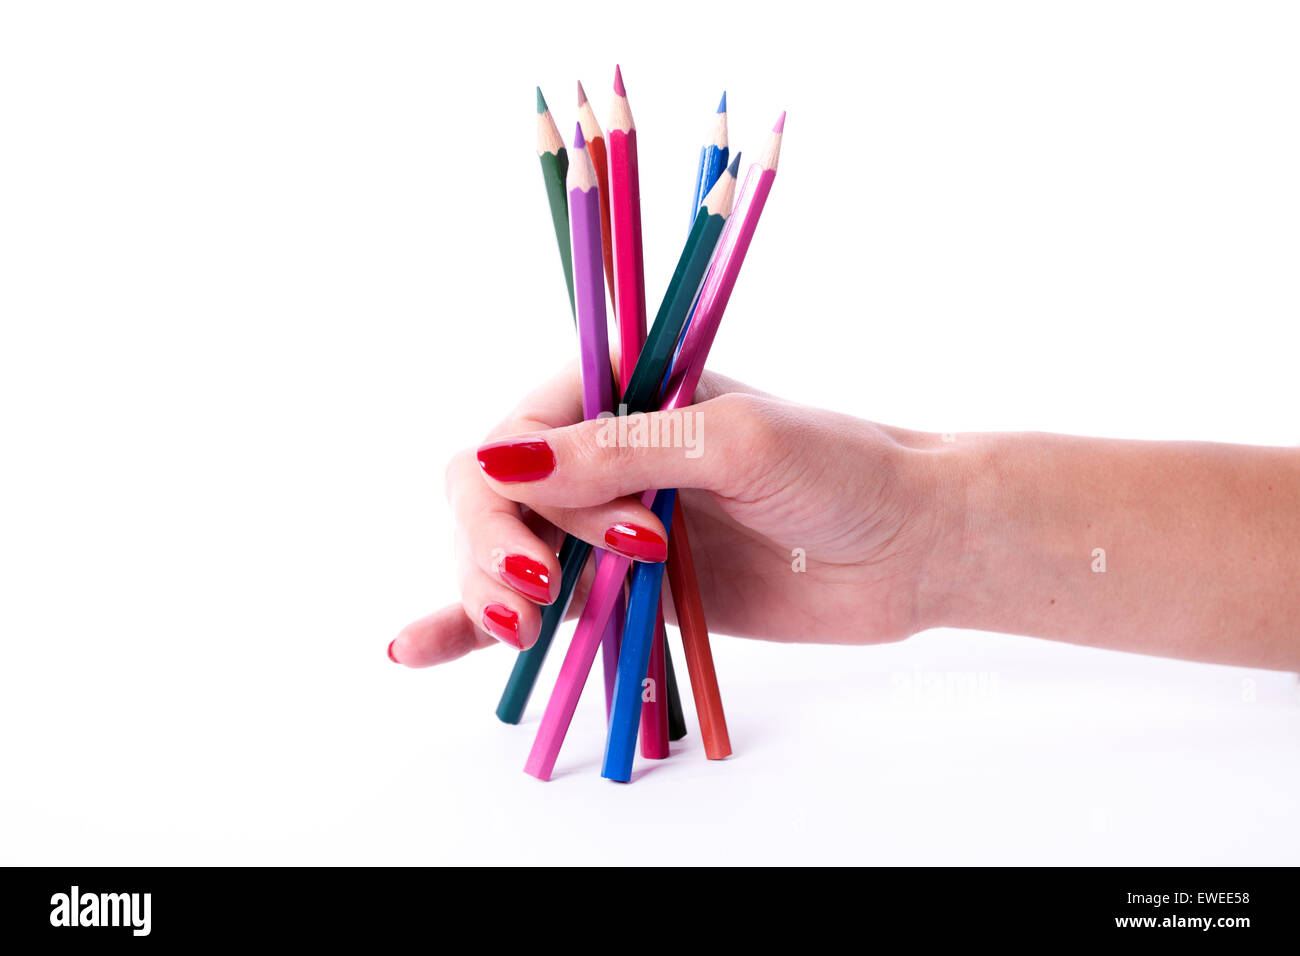 Woman hand with red manicure holding colorful pencils Stock Photo